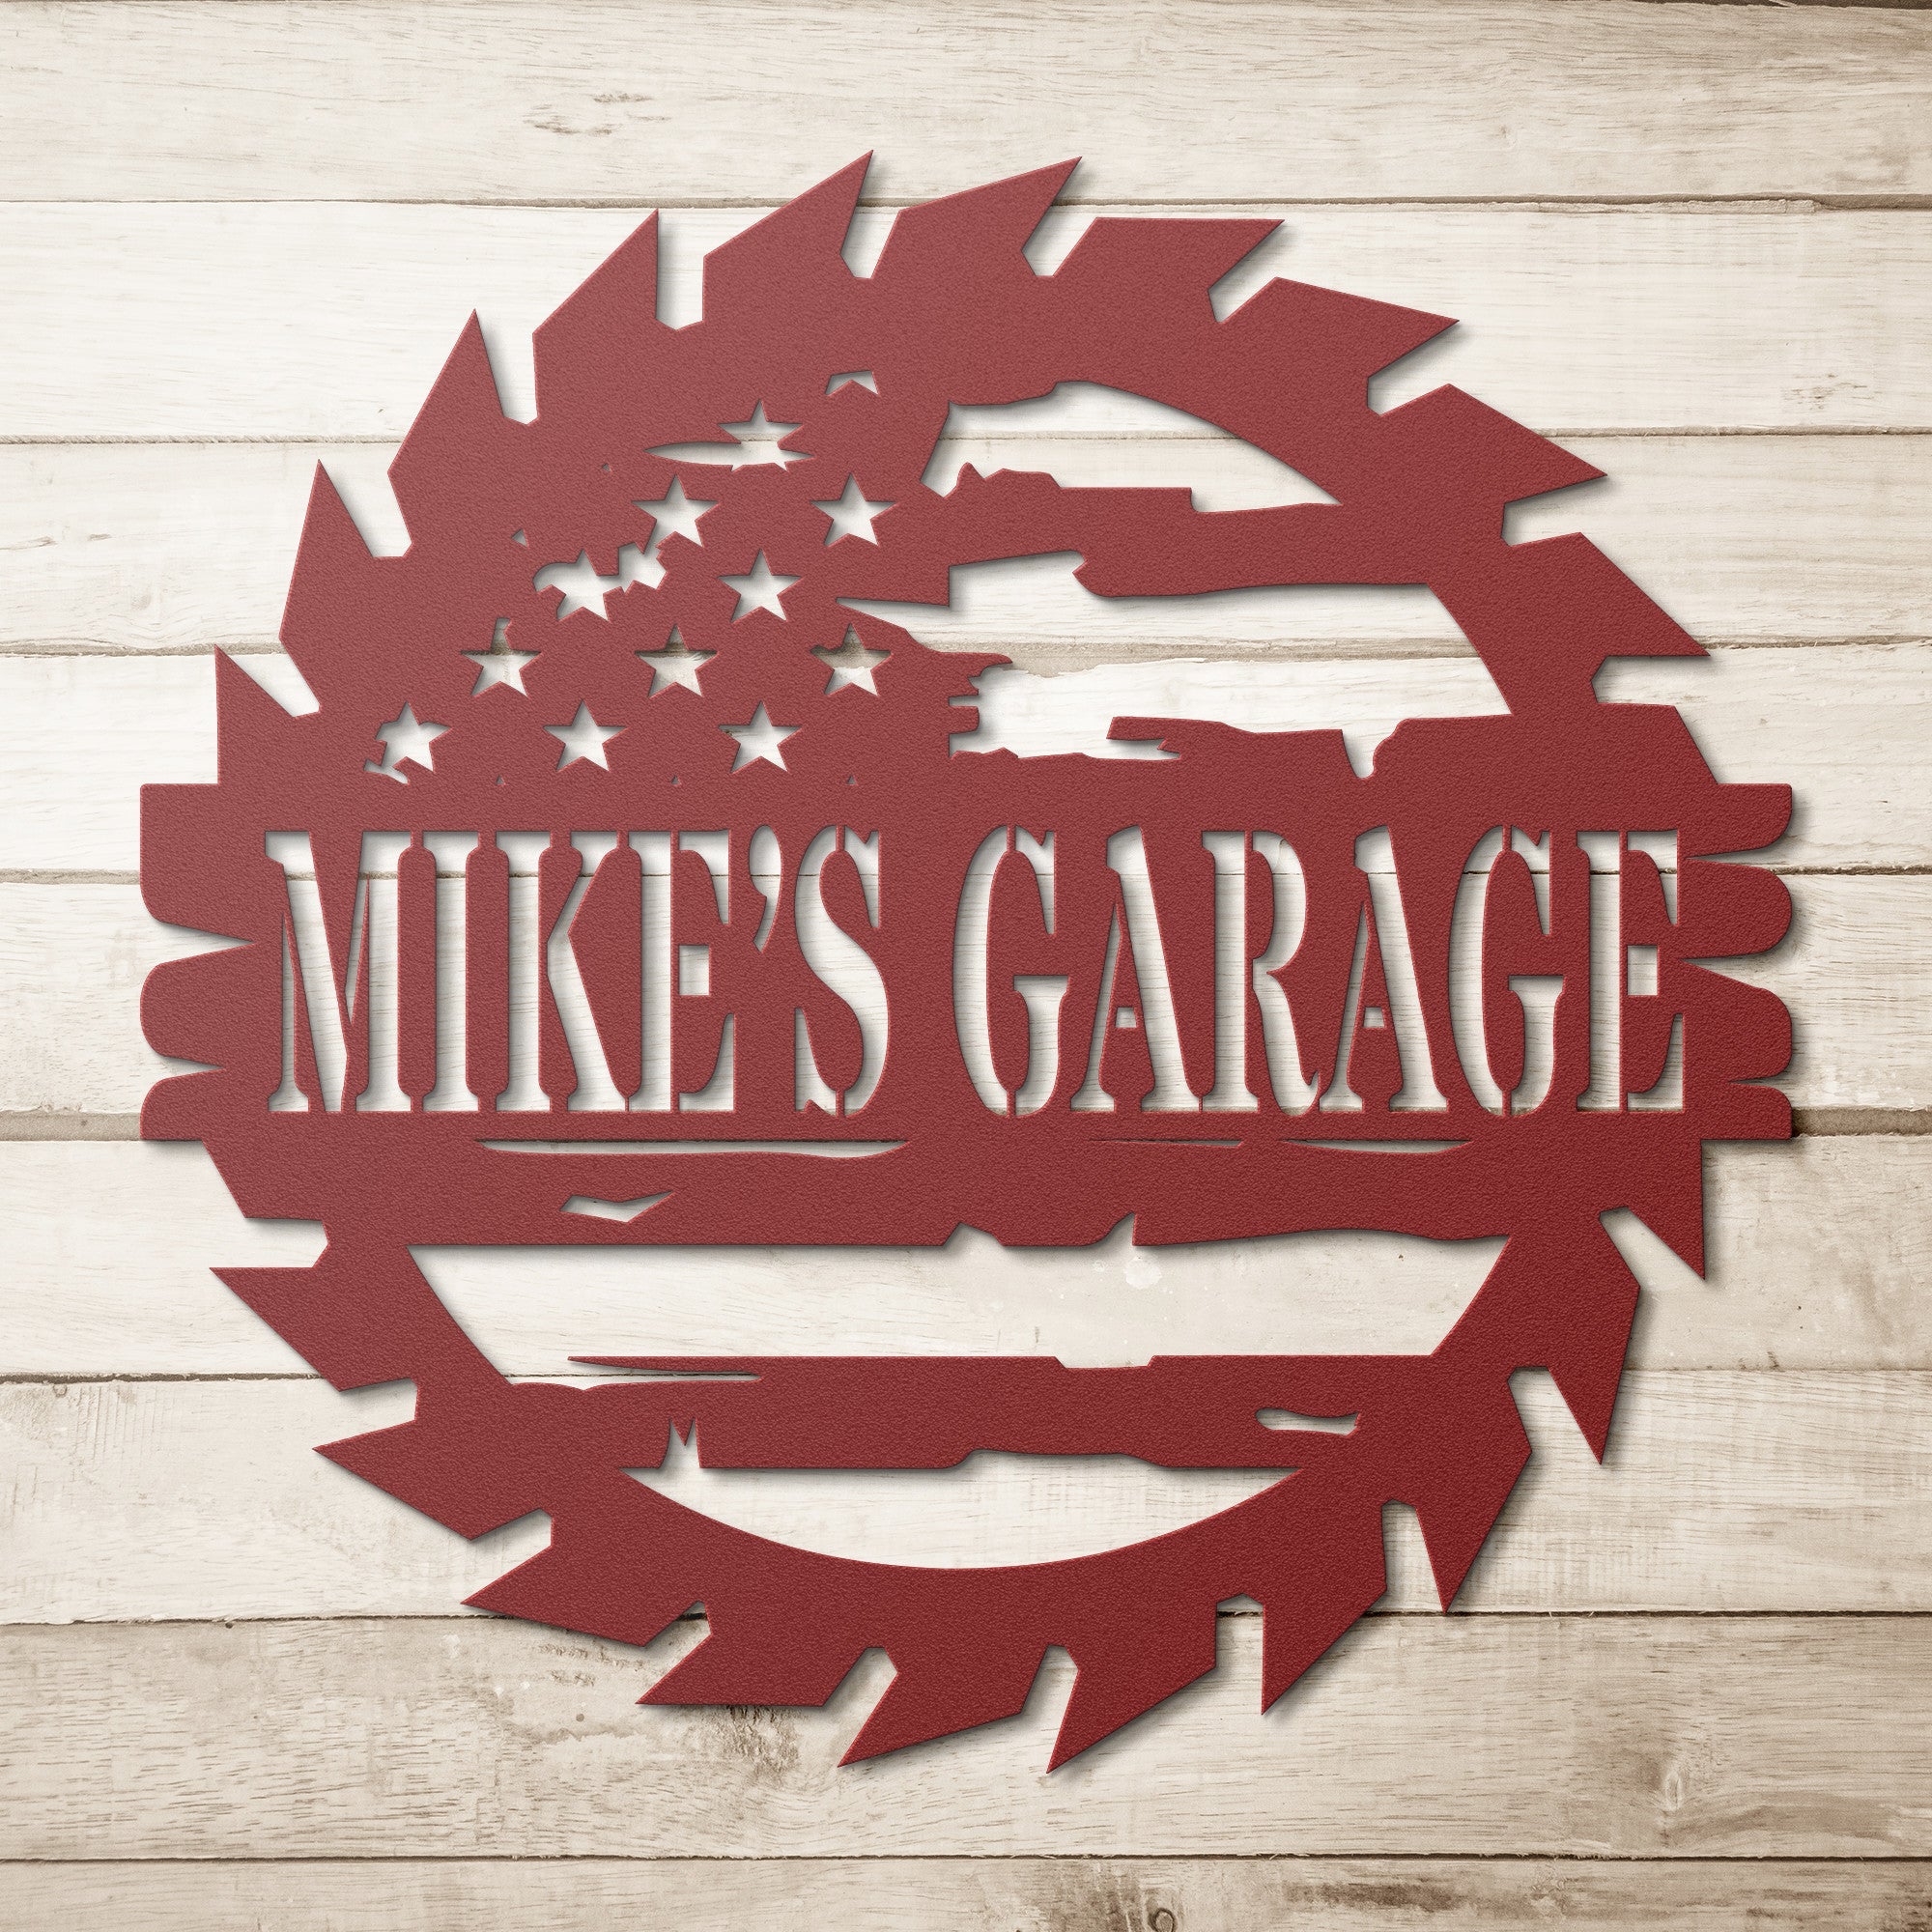 Personalized Garage Saw Sign with American Flag - Cool Metal Signs